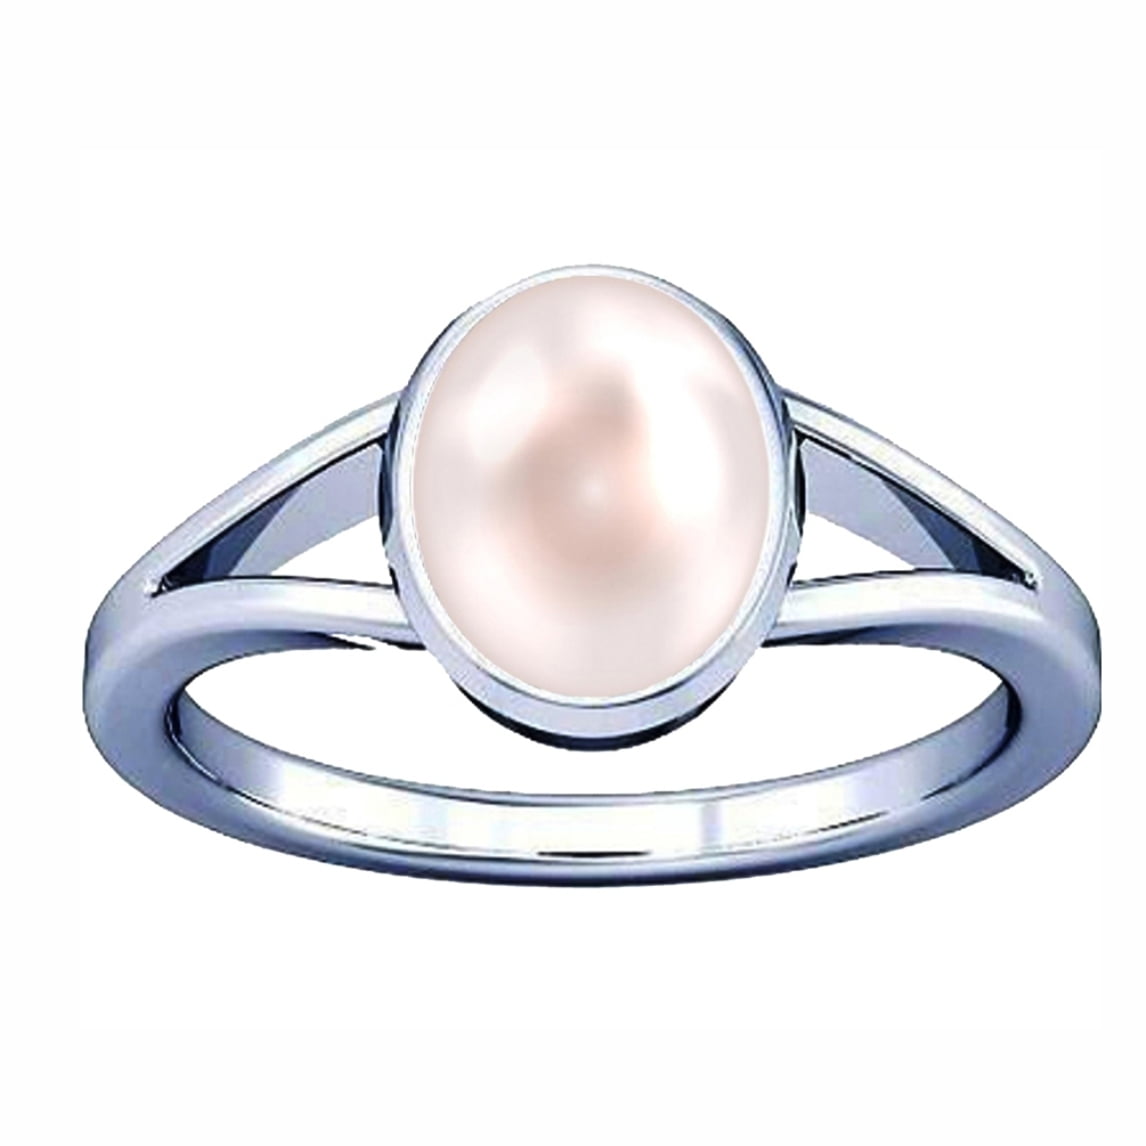 Pearl Gemstone | Astrological Rituals For Wearing A Pearl (Moti) Stone